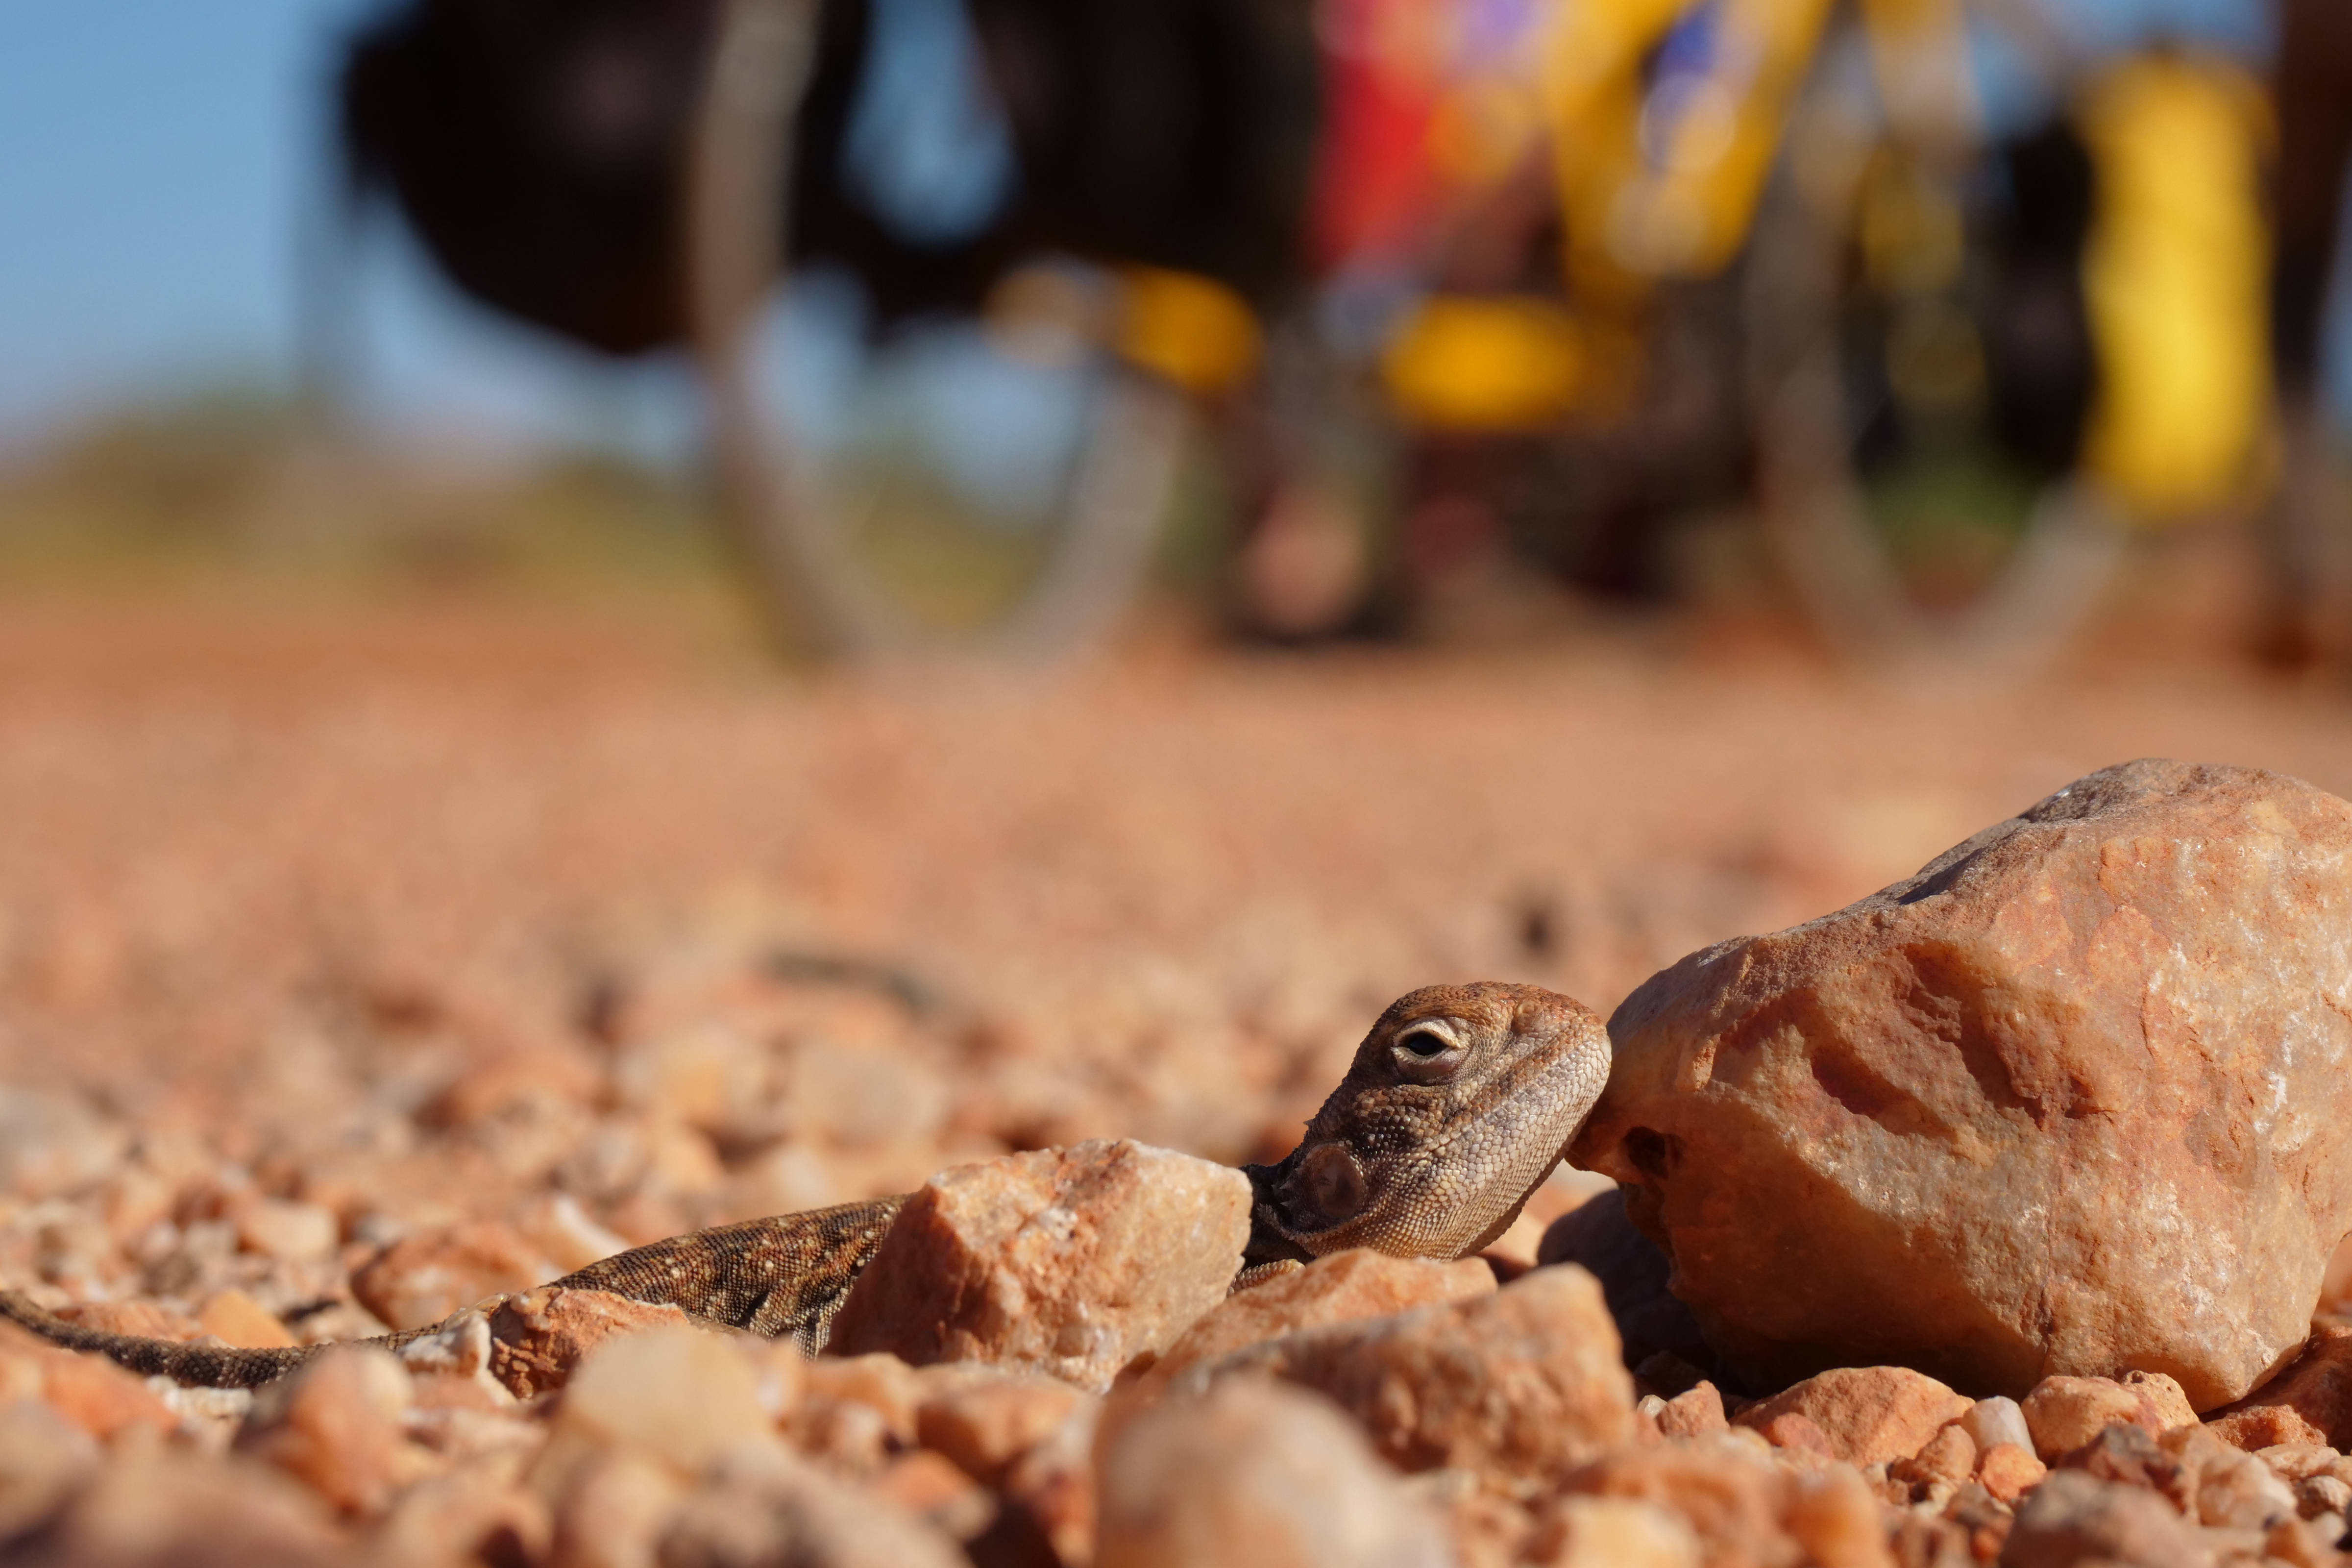 Small lizard camouflaged on dirt road as bicycle passes in background.